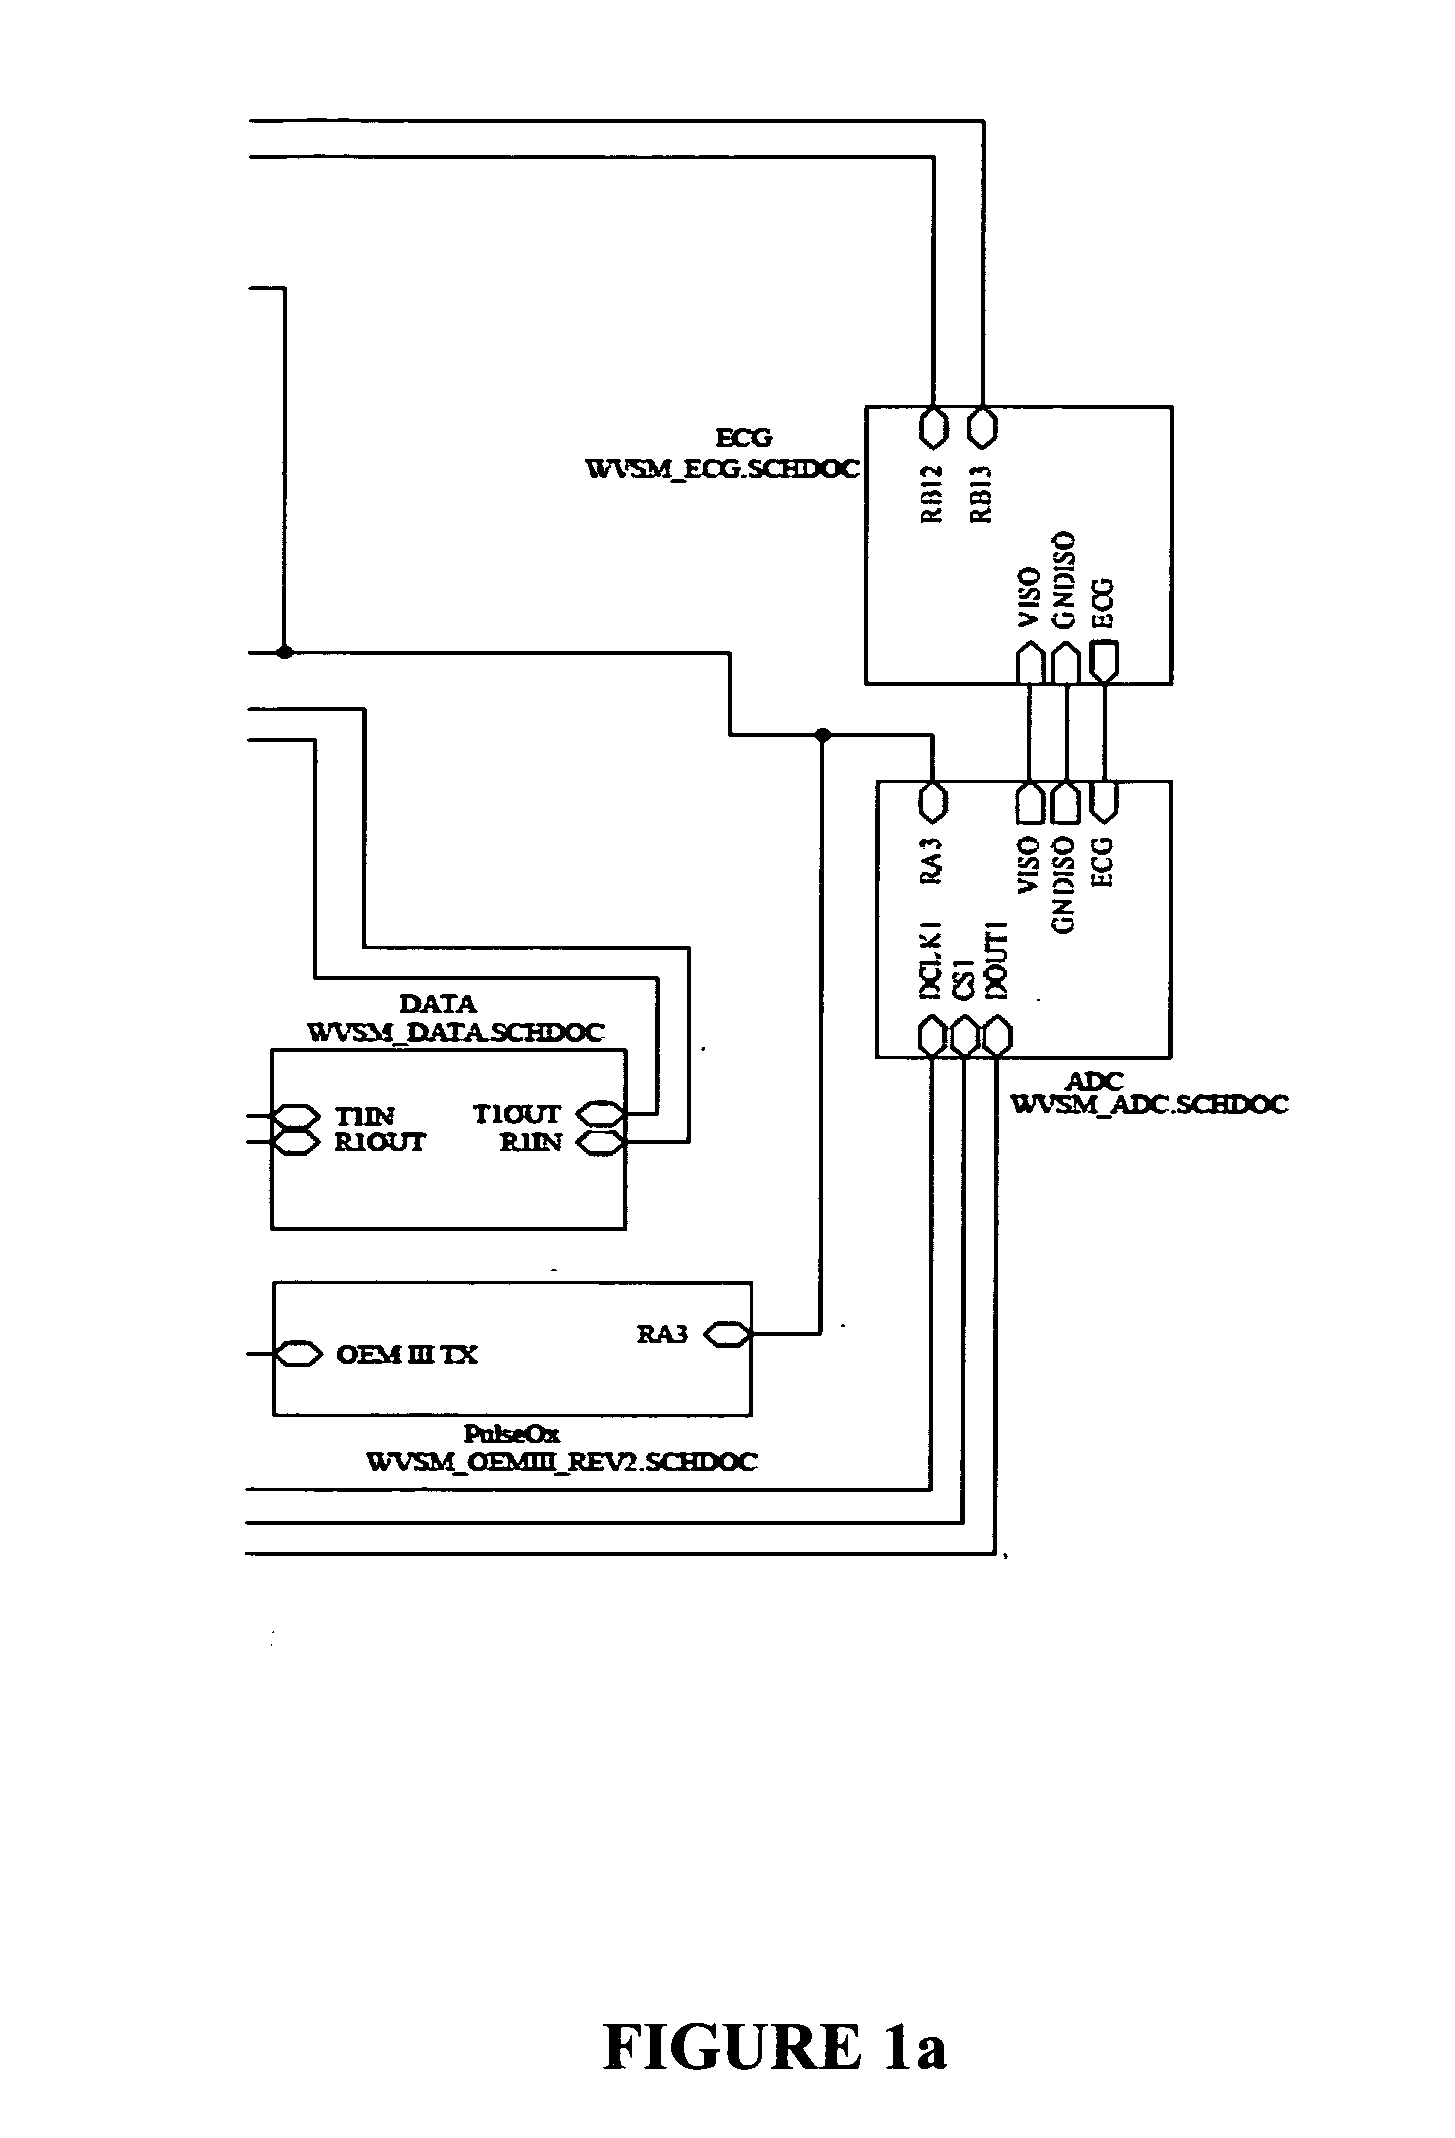 Device and system for wireless monitoring of the vital signs of patients